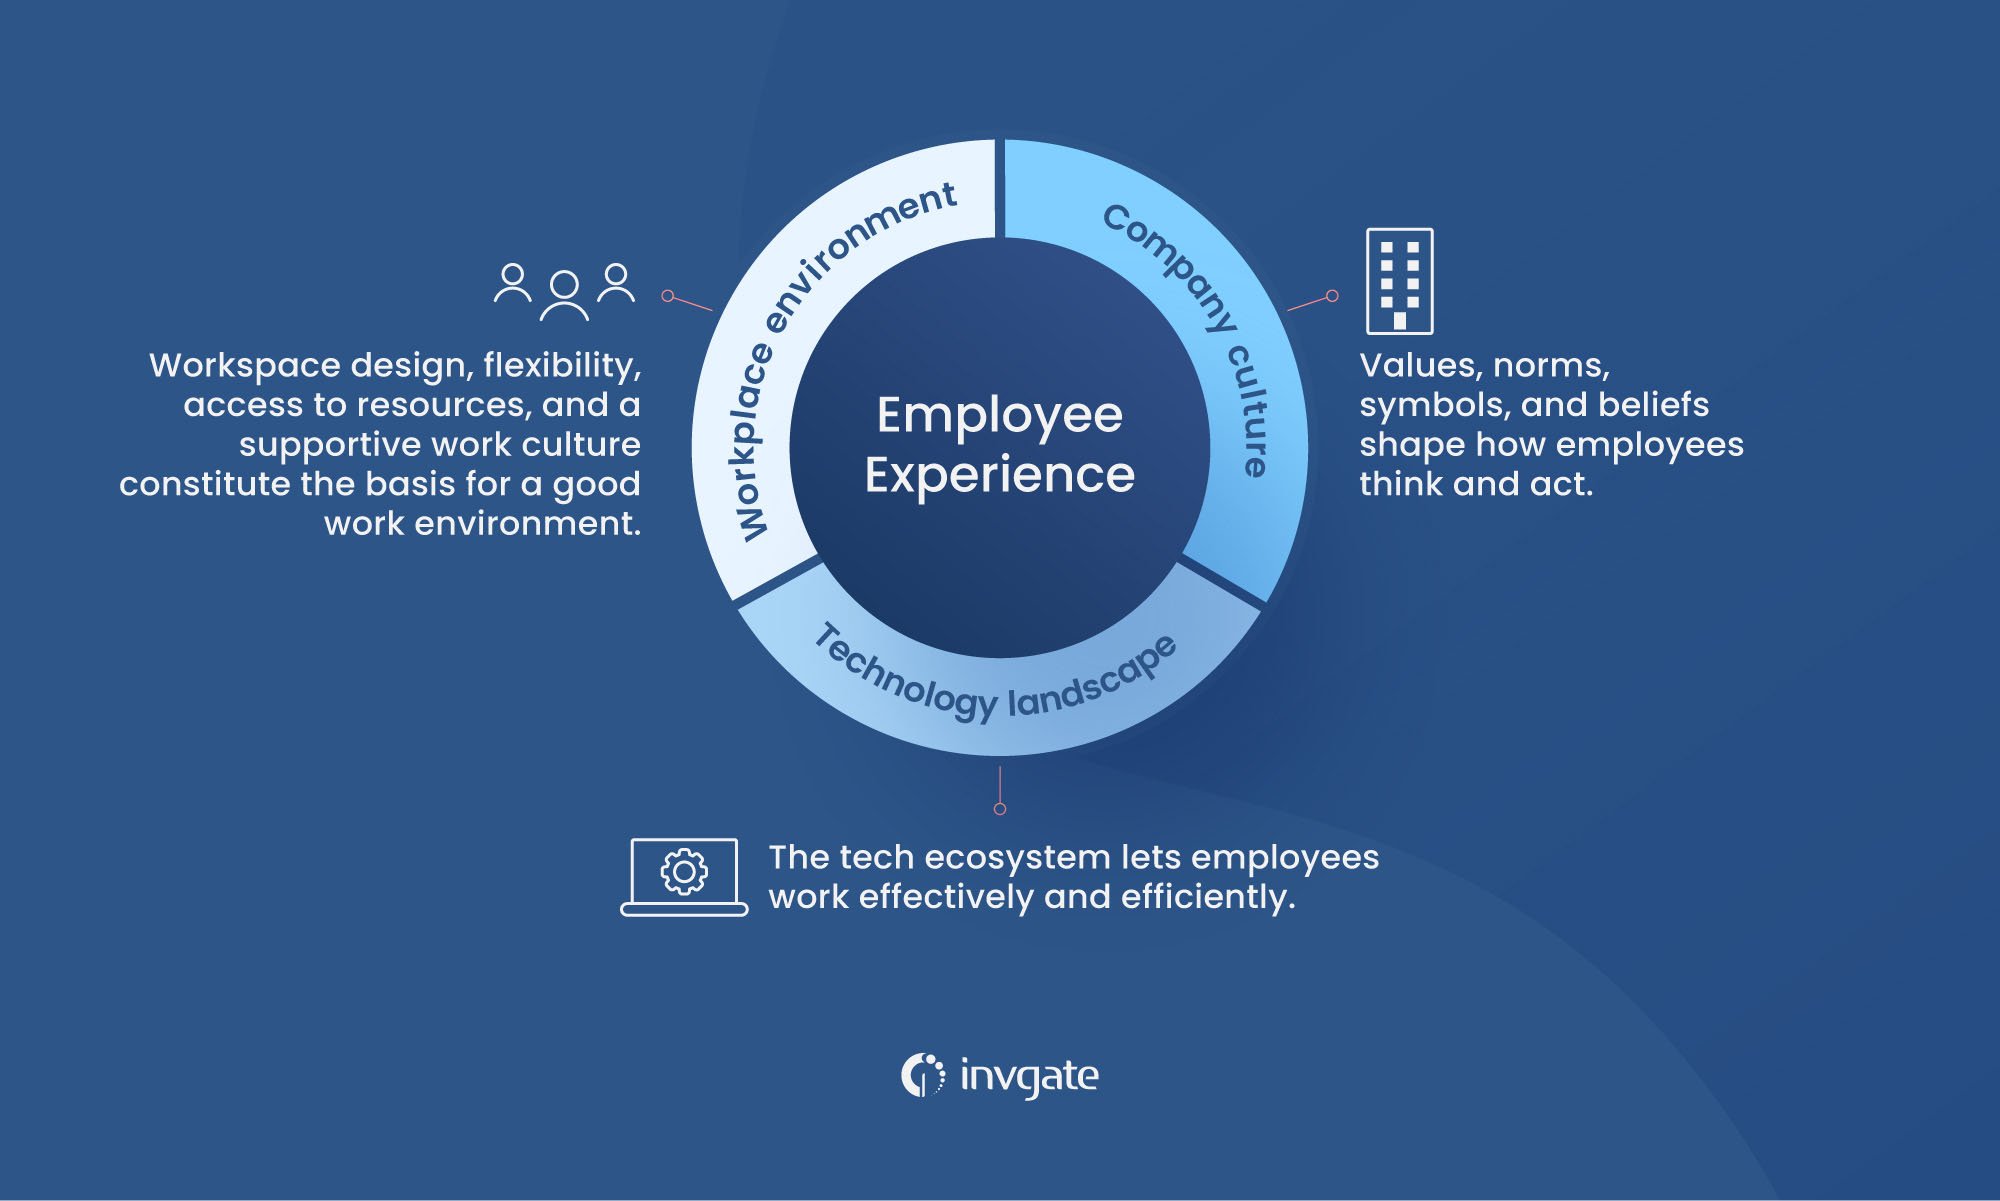 These three areas of employee experience need to be aligned to create a positive atmosphere for everyone in the organization.